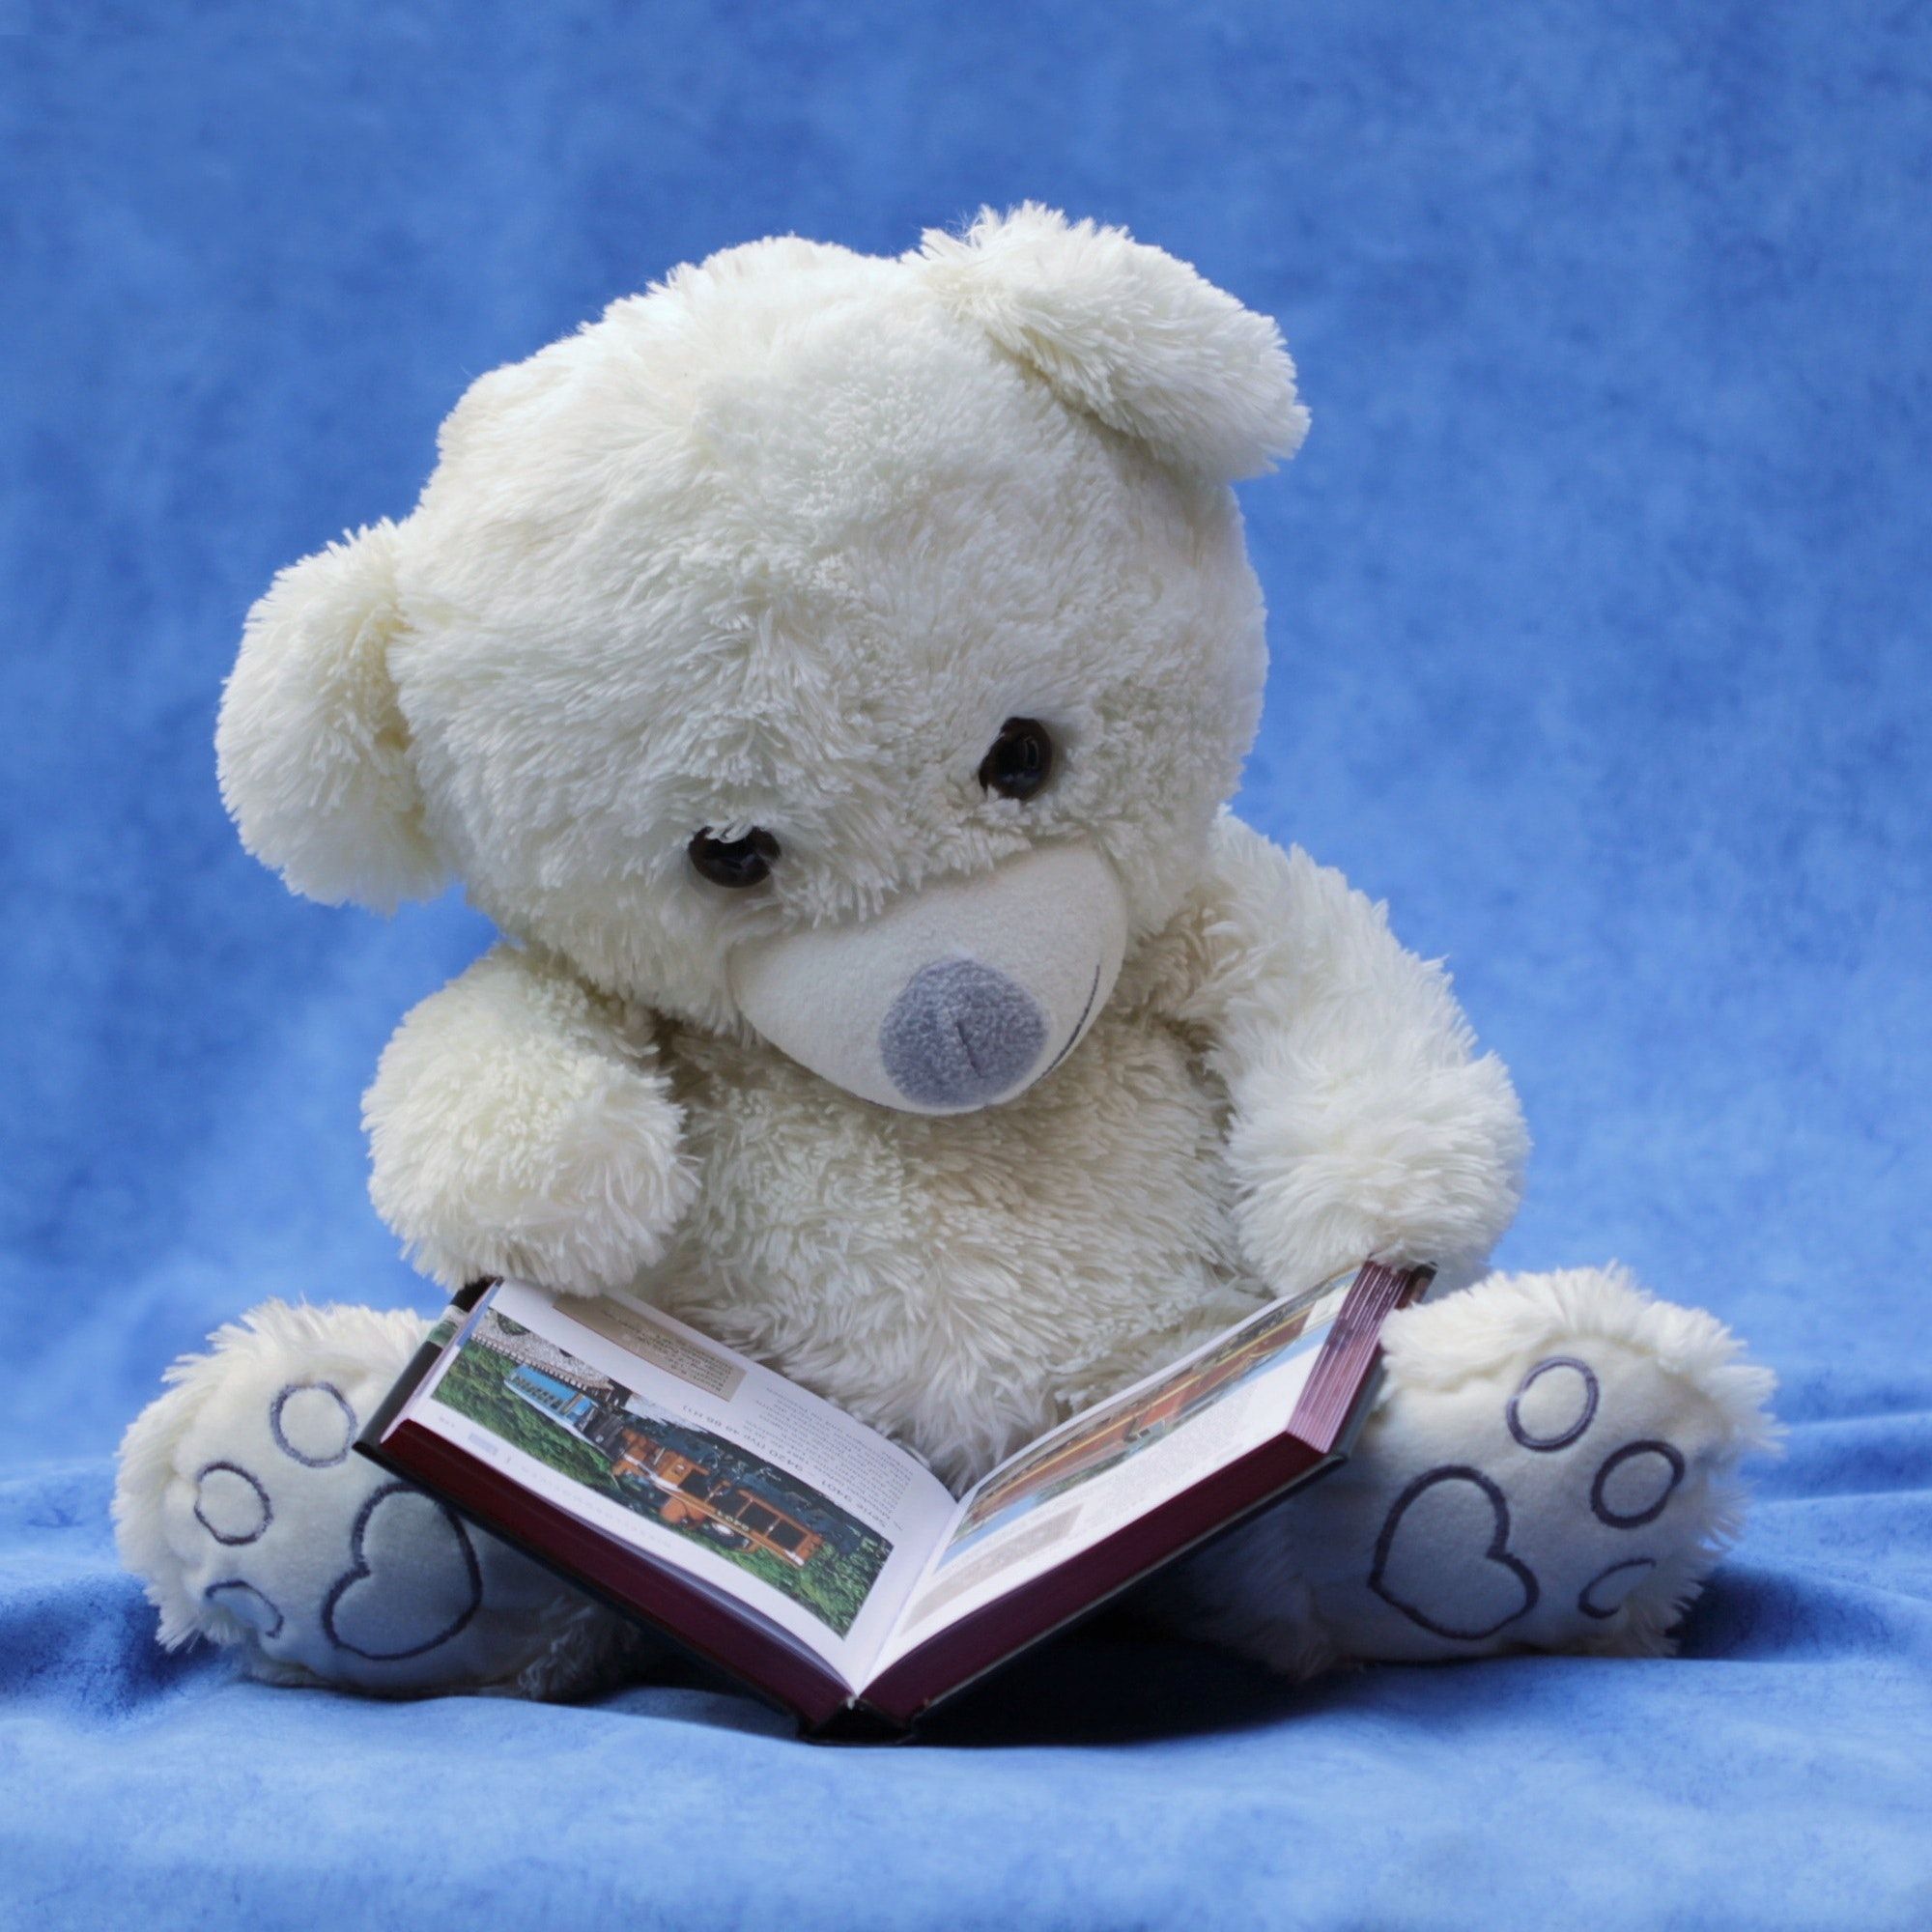 White Teddy Bear With Opened Book Photo · Free